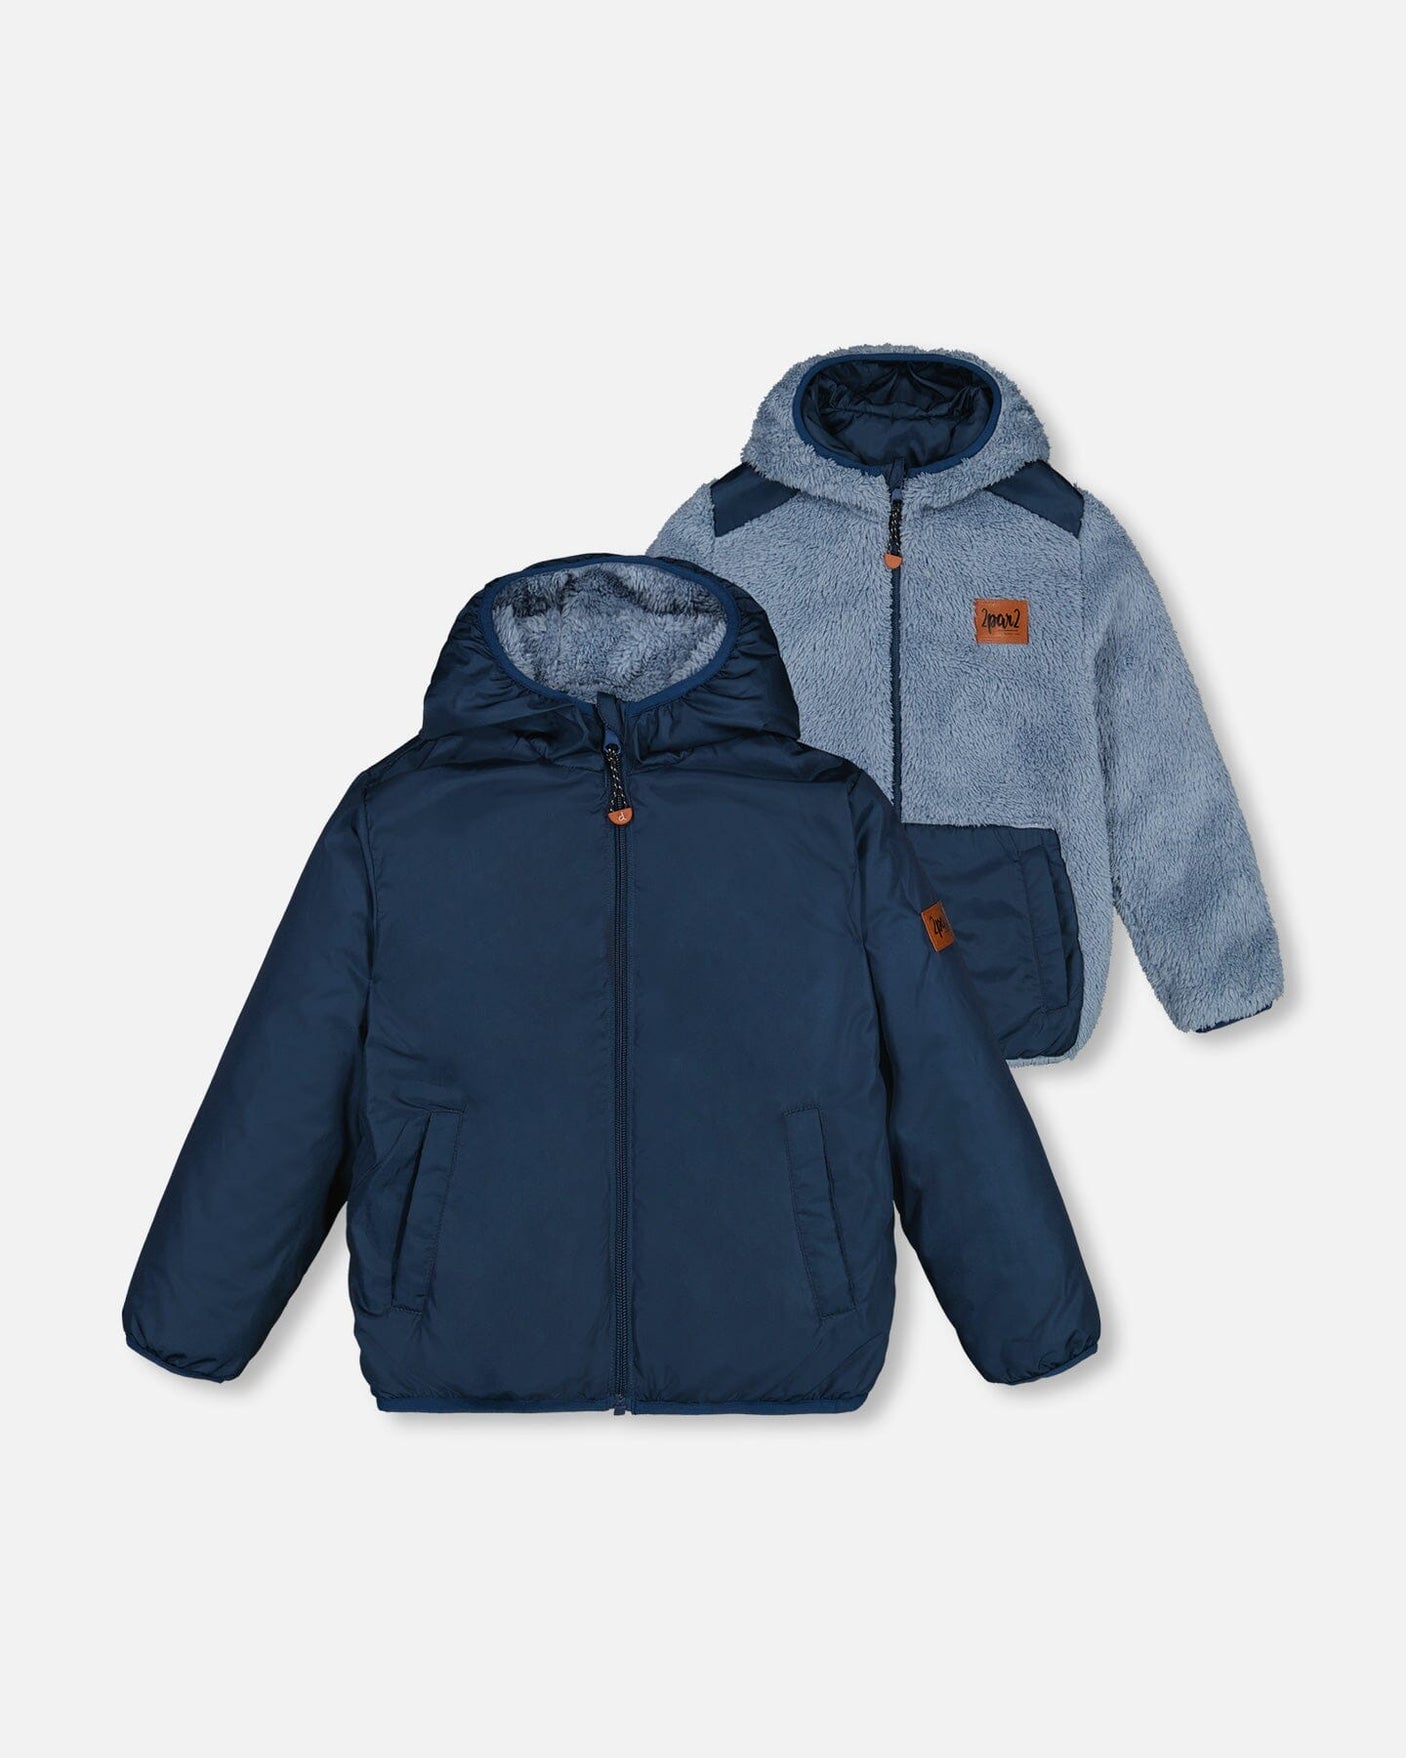 Transition Reversible Sherpa And Nylon Jacket Teal Blue-0